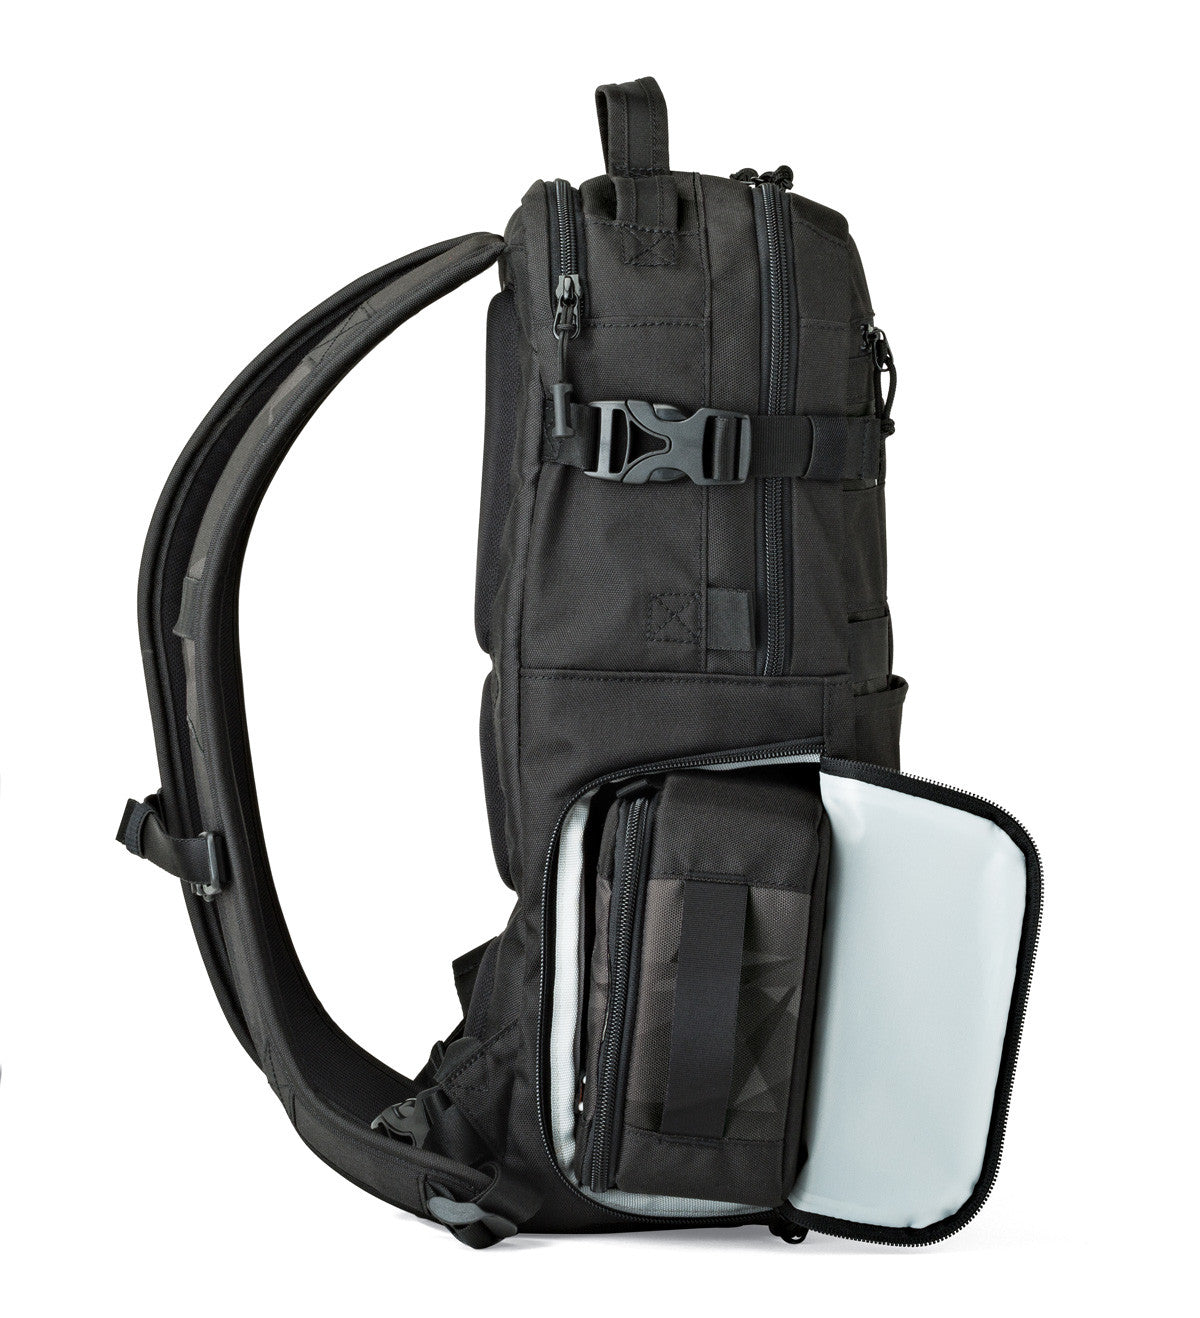 Lowepro ViewPoint BP 250 AW Backpack for DJI Mavic Drone or Action Cameras (Black)